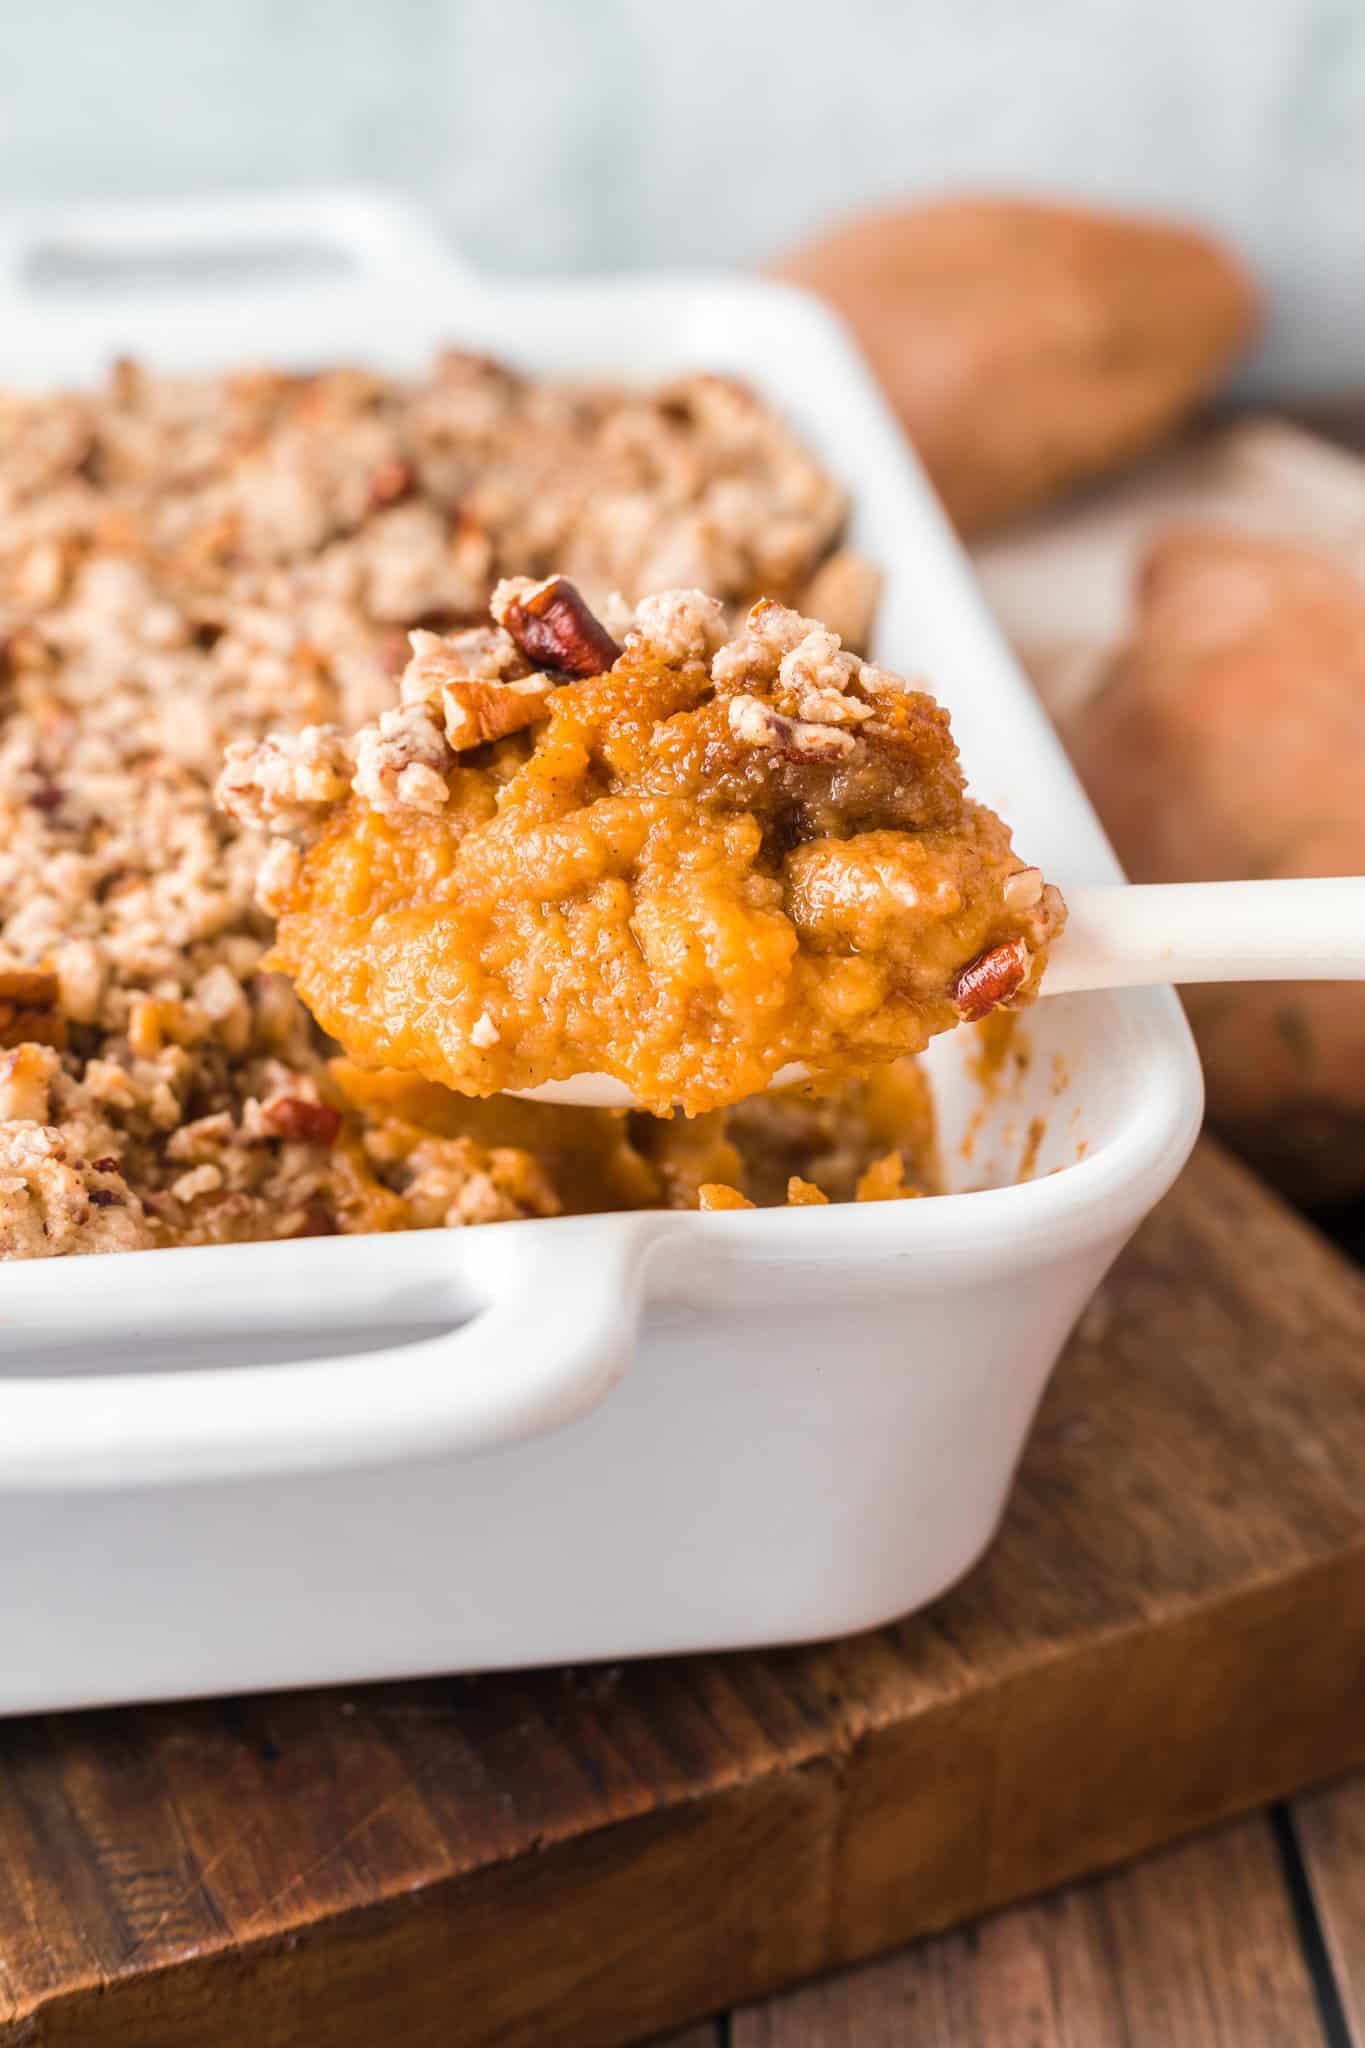 Easy Sweet Potato Casserole is a creamy sweet potato dish made with canned sweet potatoes and topped with a brown sugar pecan crumble.